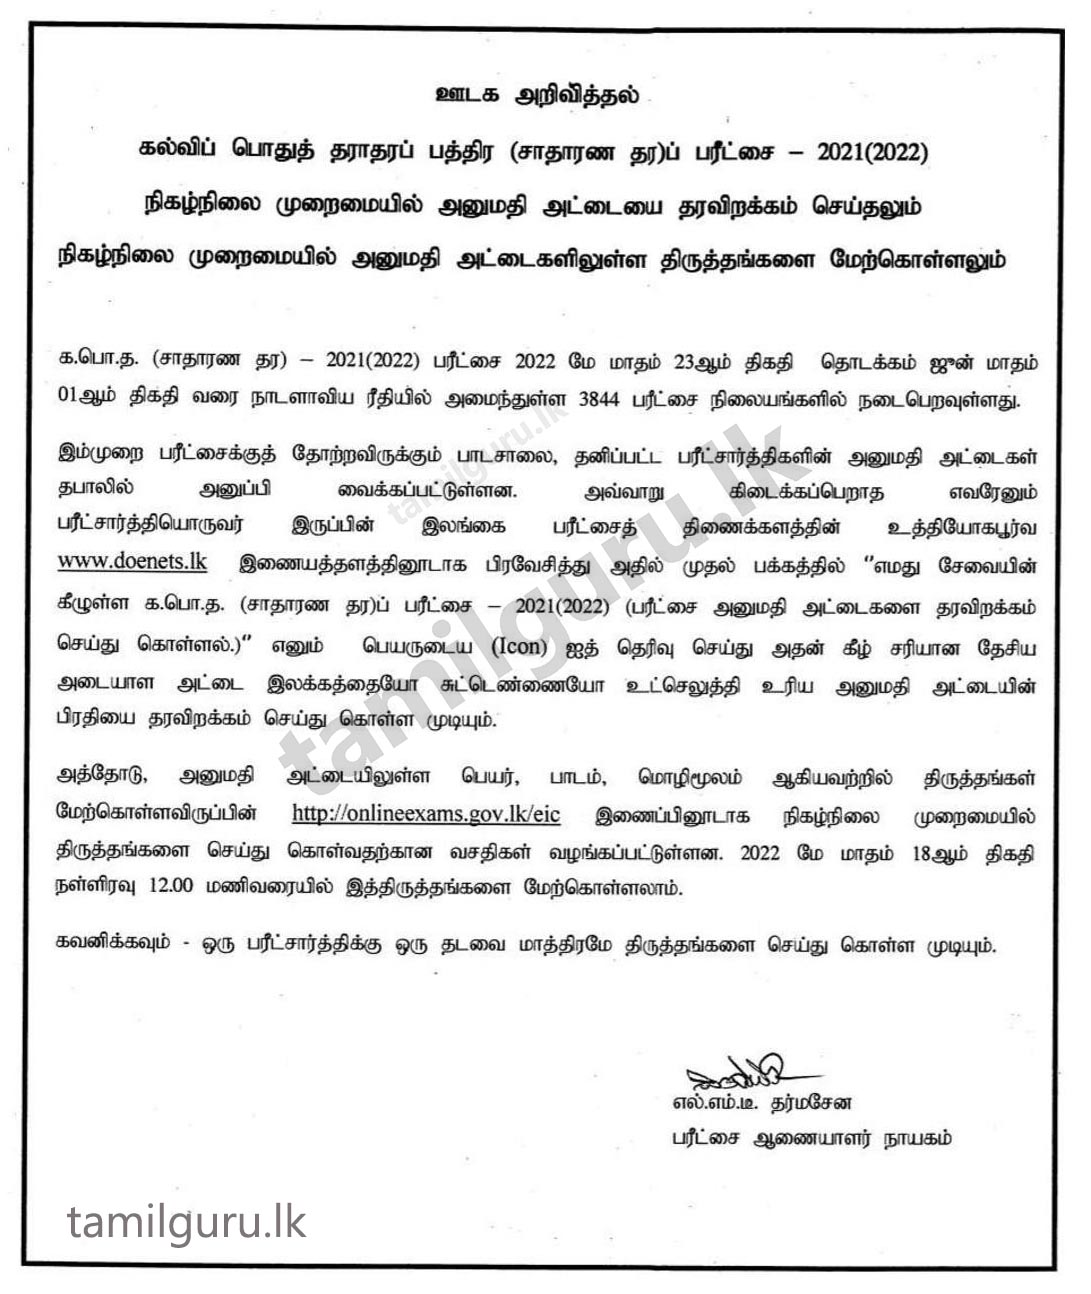 Admission Card (Download) for G.C.E O/L Examination 2021 (2022) (Details in Tamil)